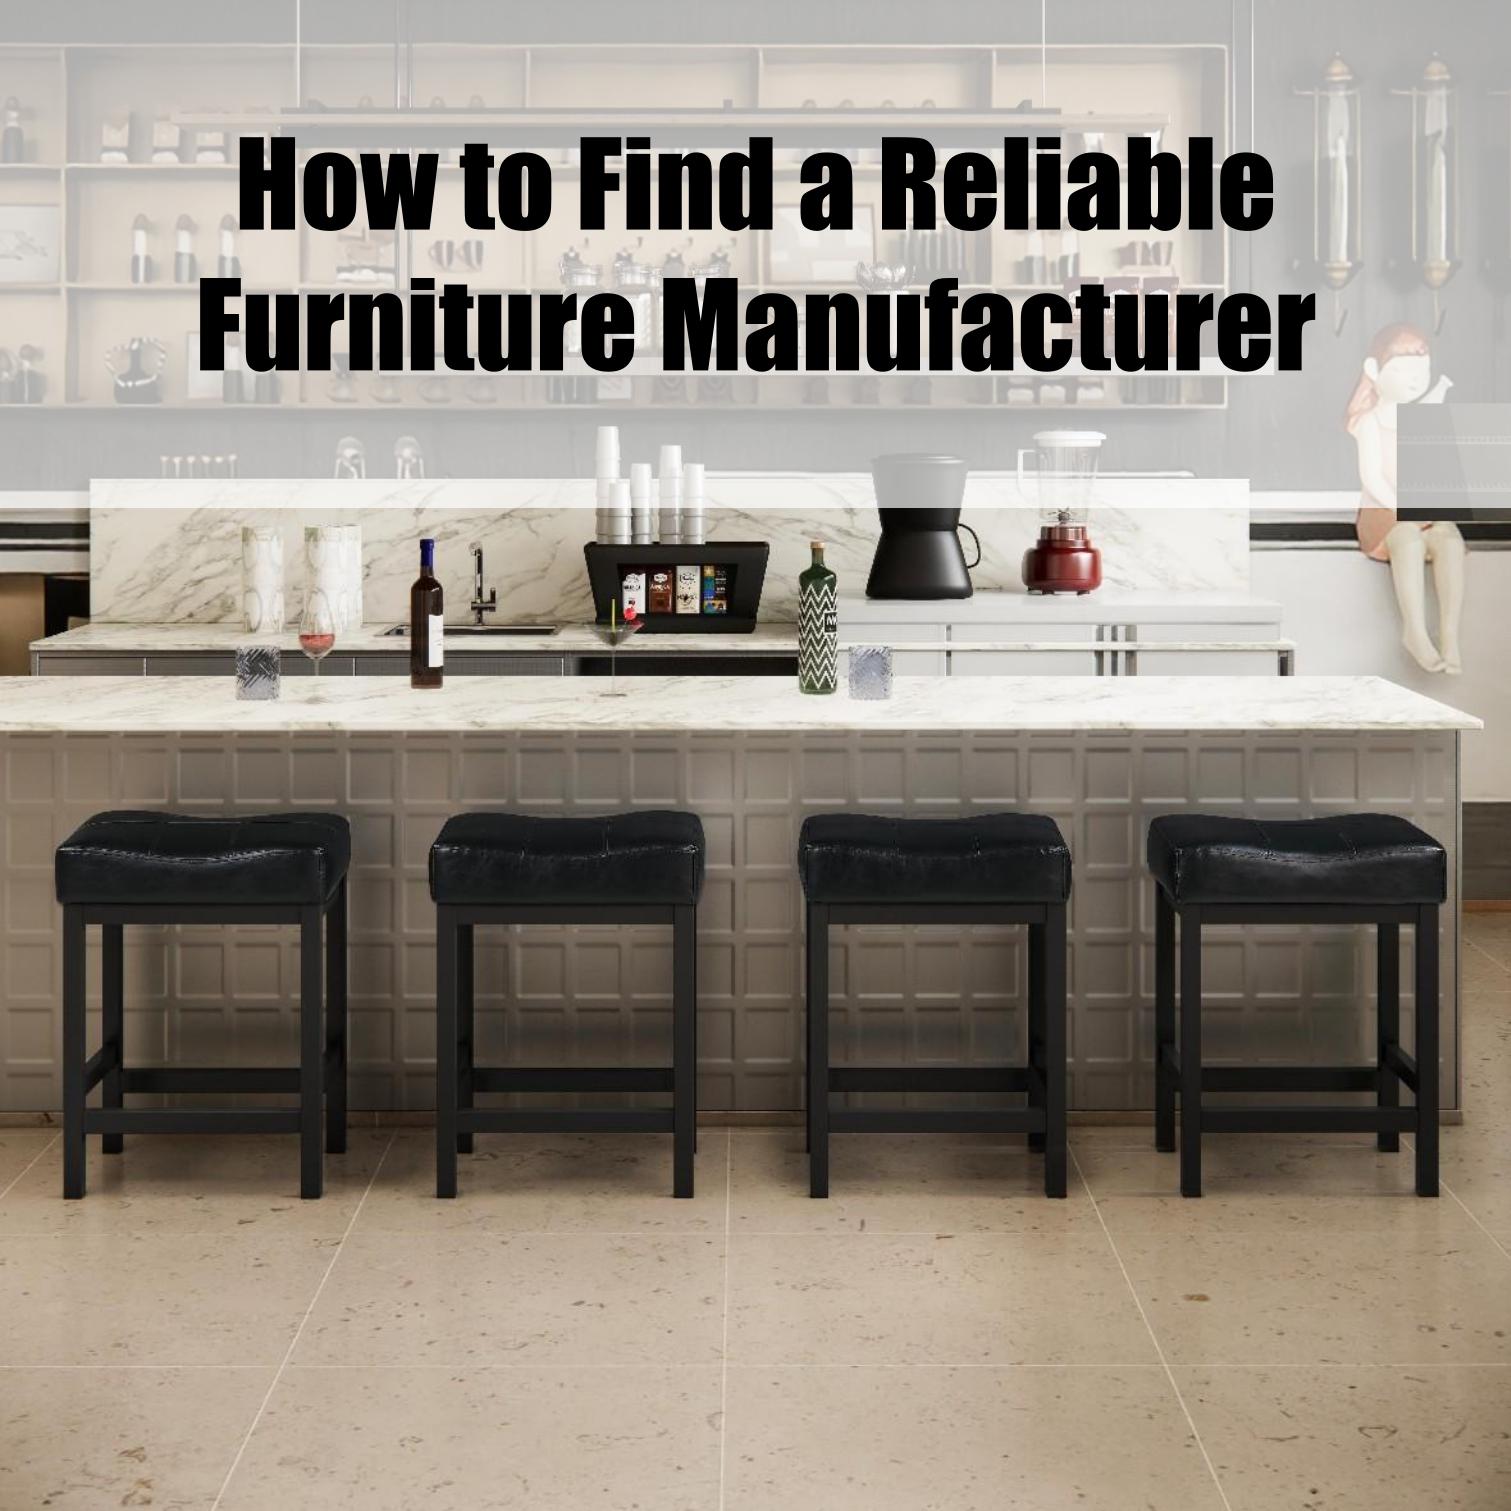 How to Find a Reliable Furniture Manufacturer